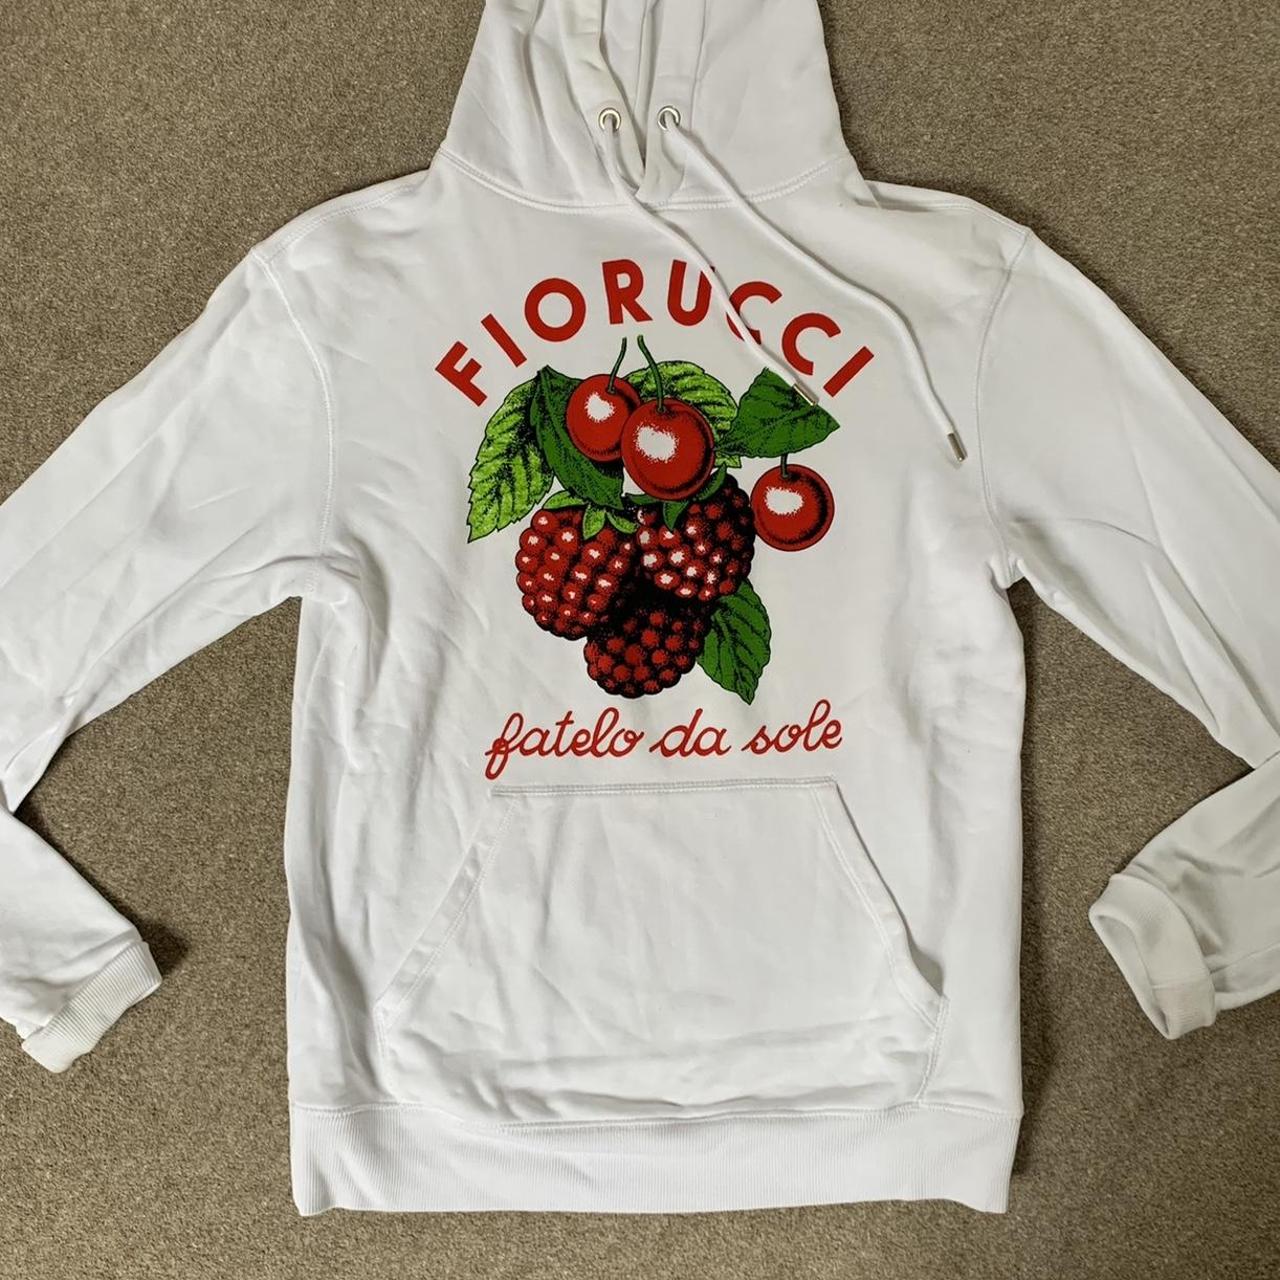 Fiorucci Women's White and Red Hoodie | Depop